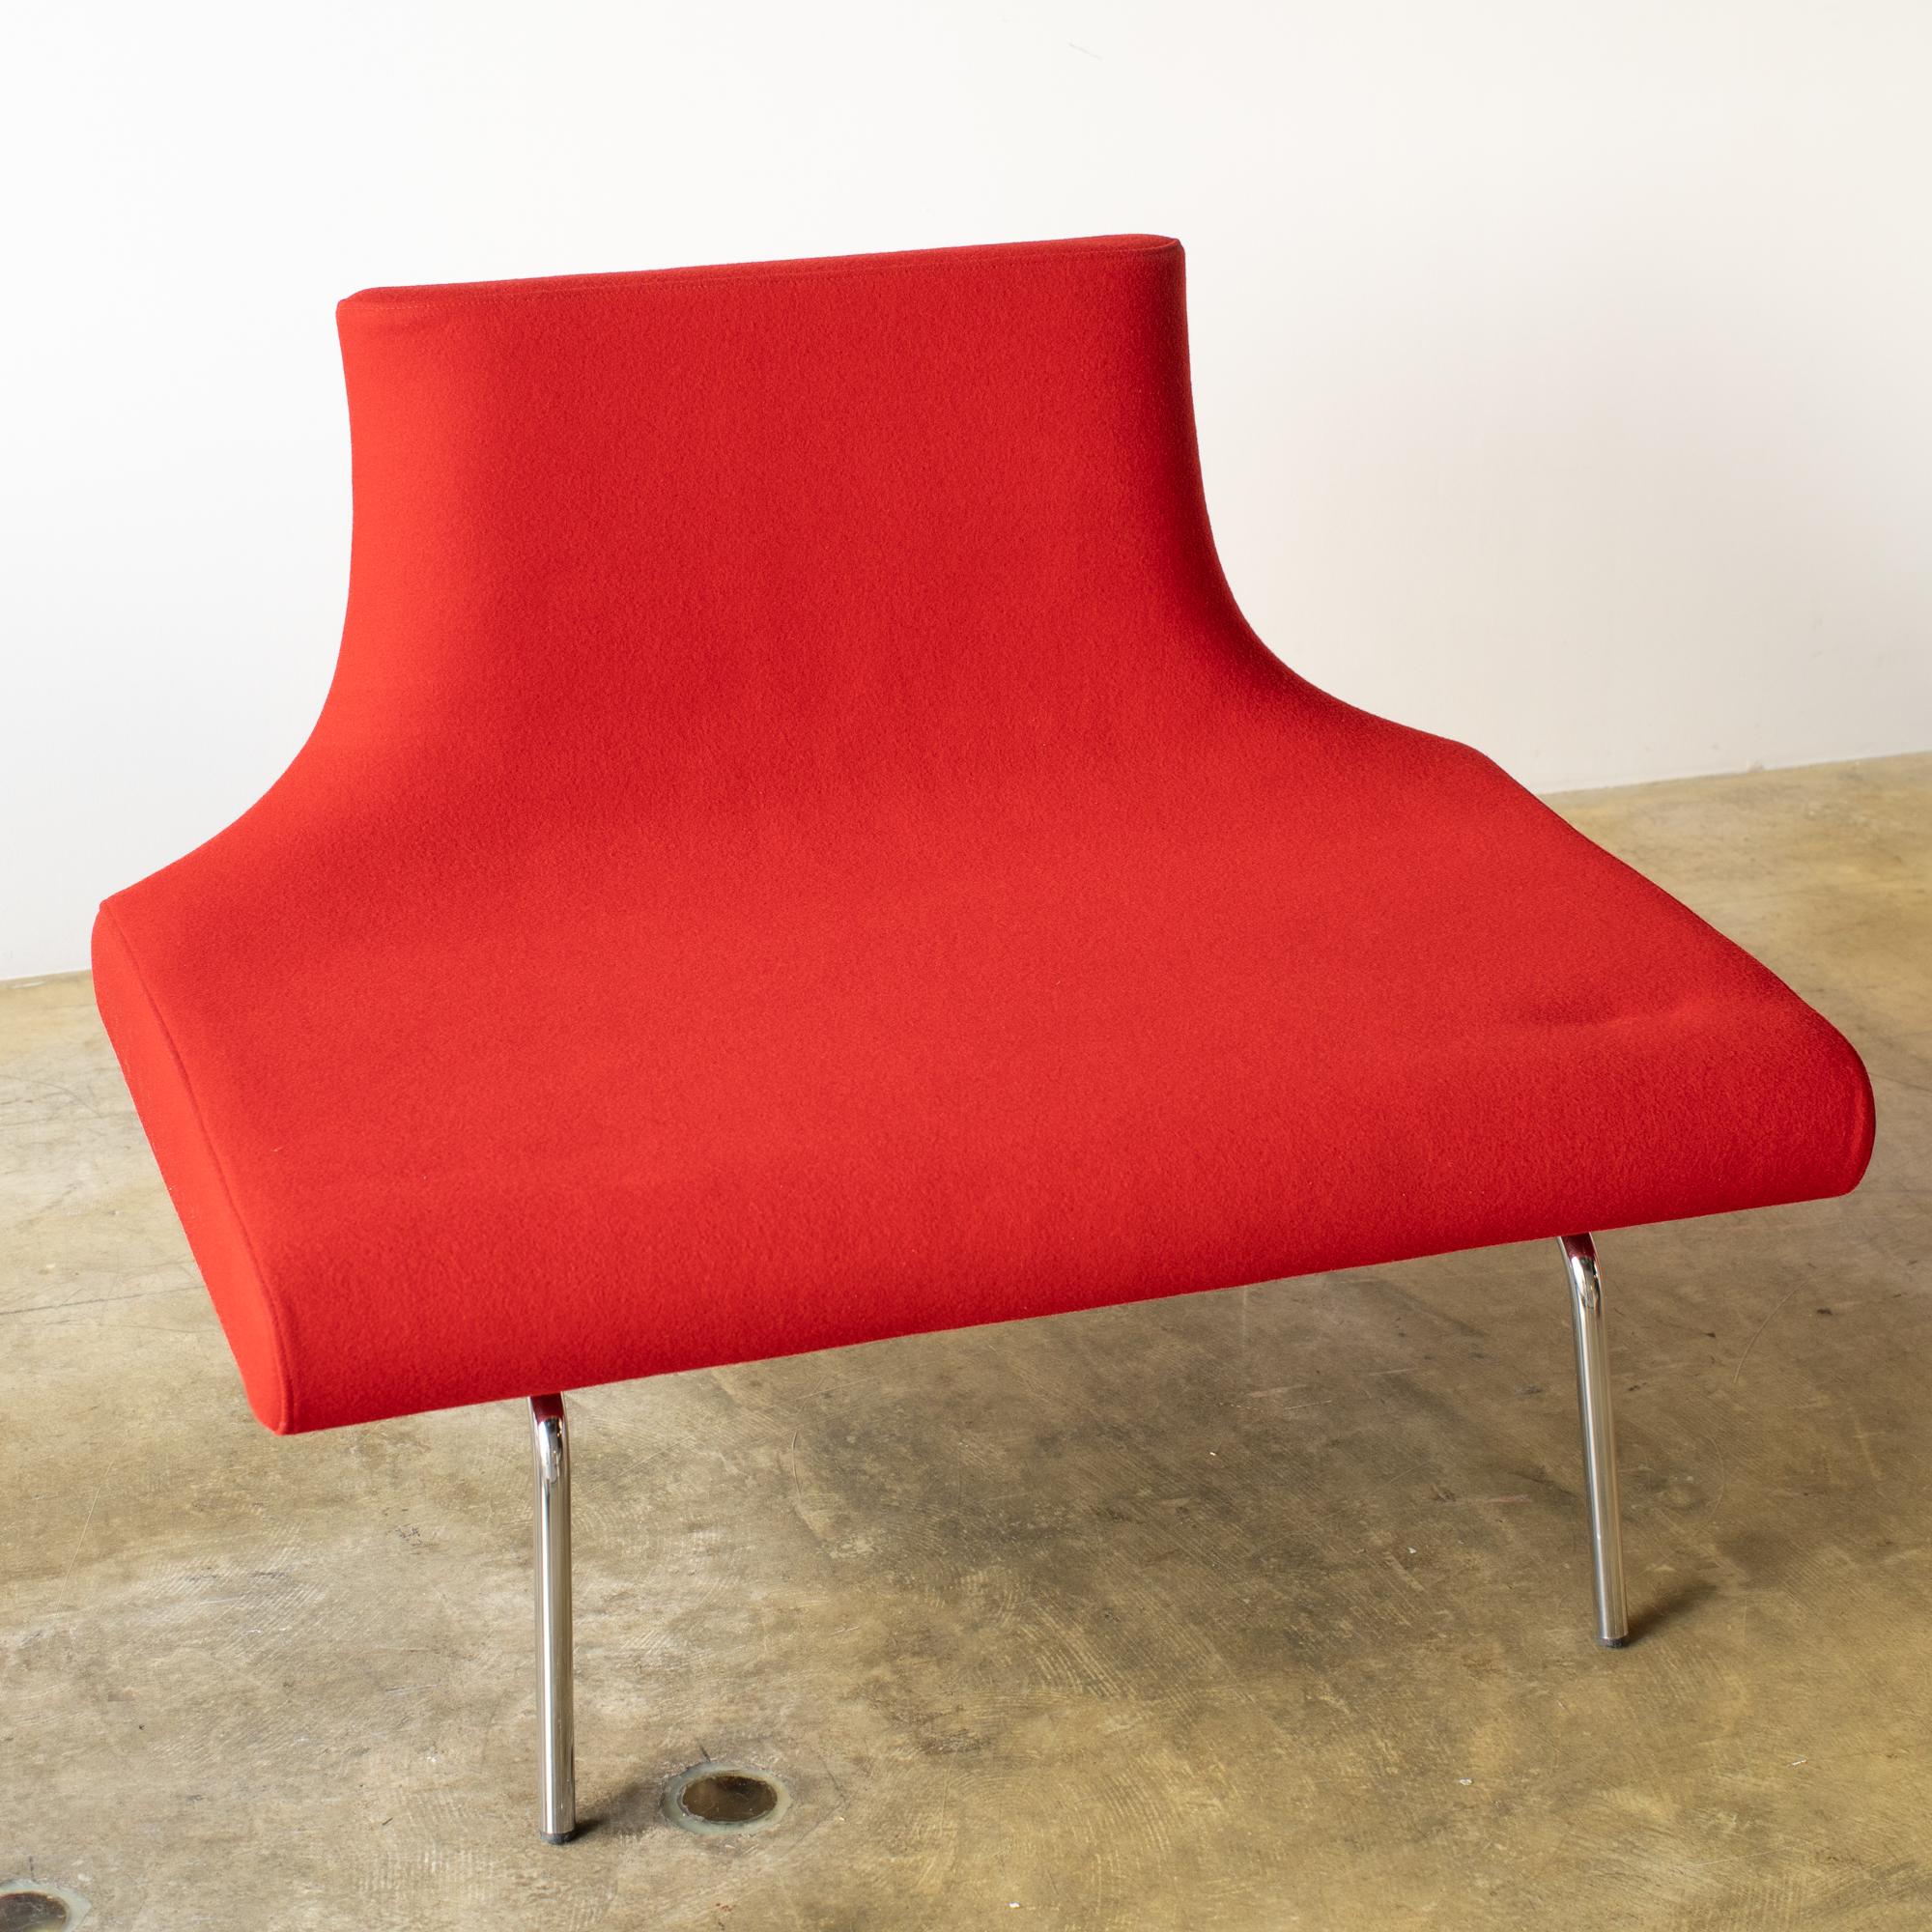 Contemporary Chair red fabric Orbit sofa Eero Koivisto  Y2K style design space age For Sale